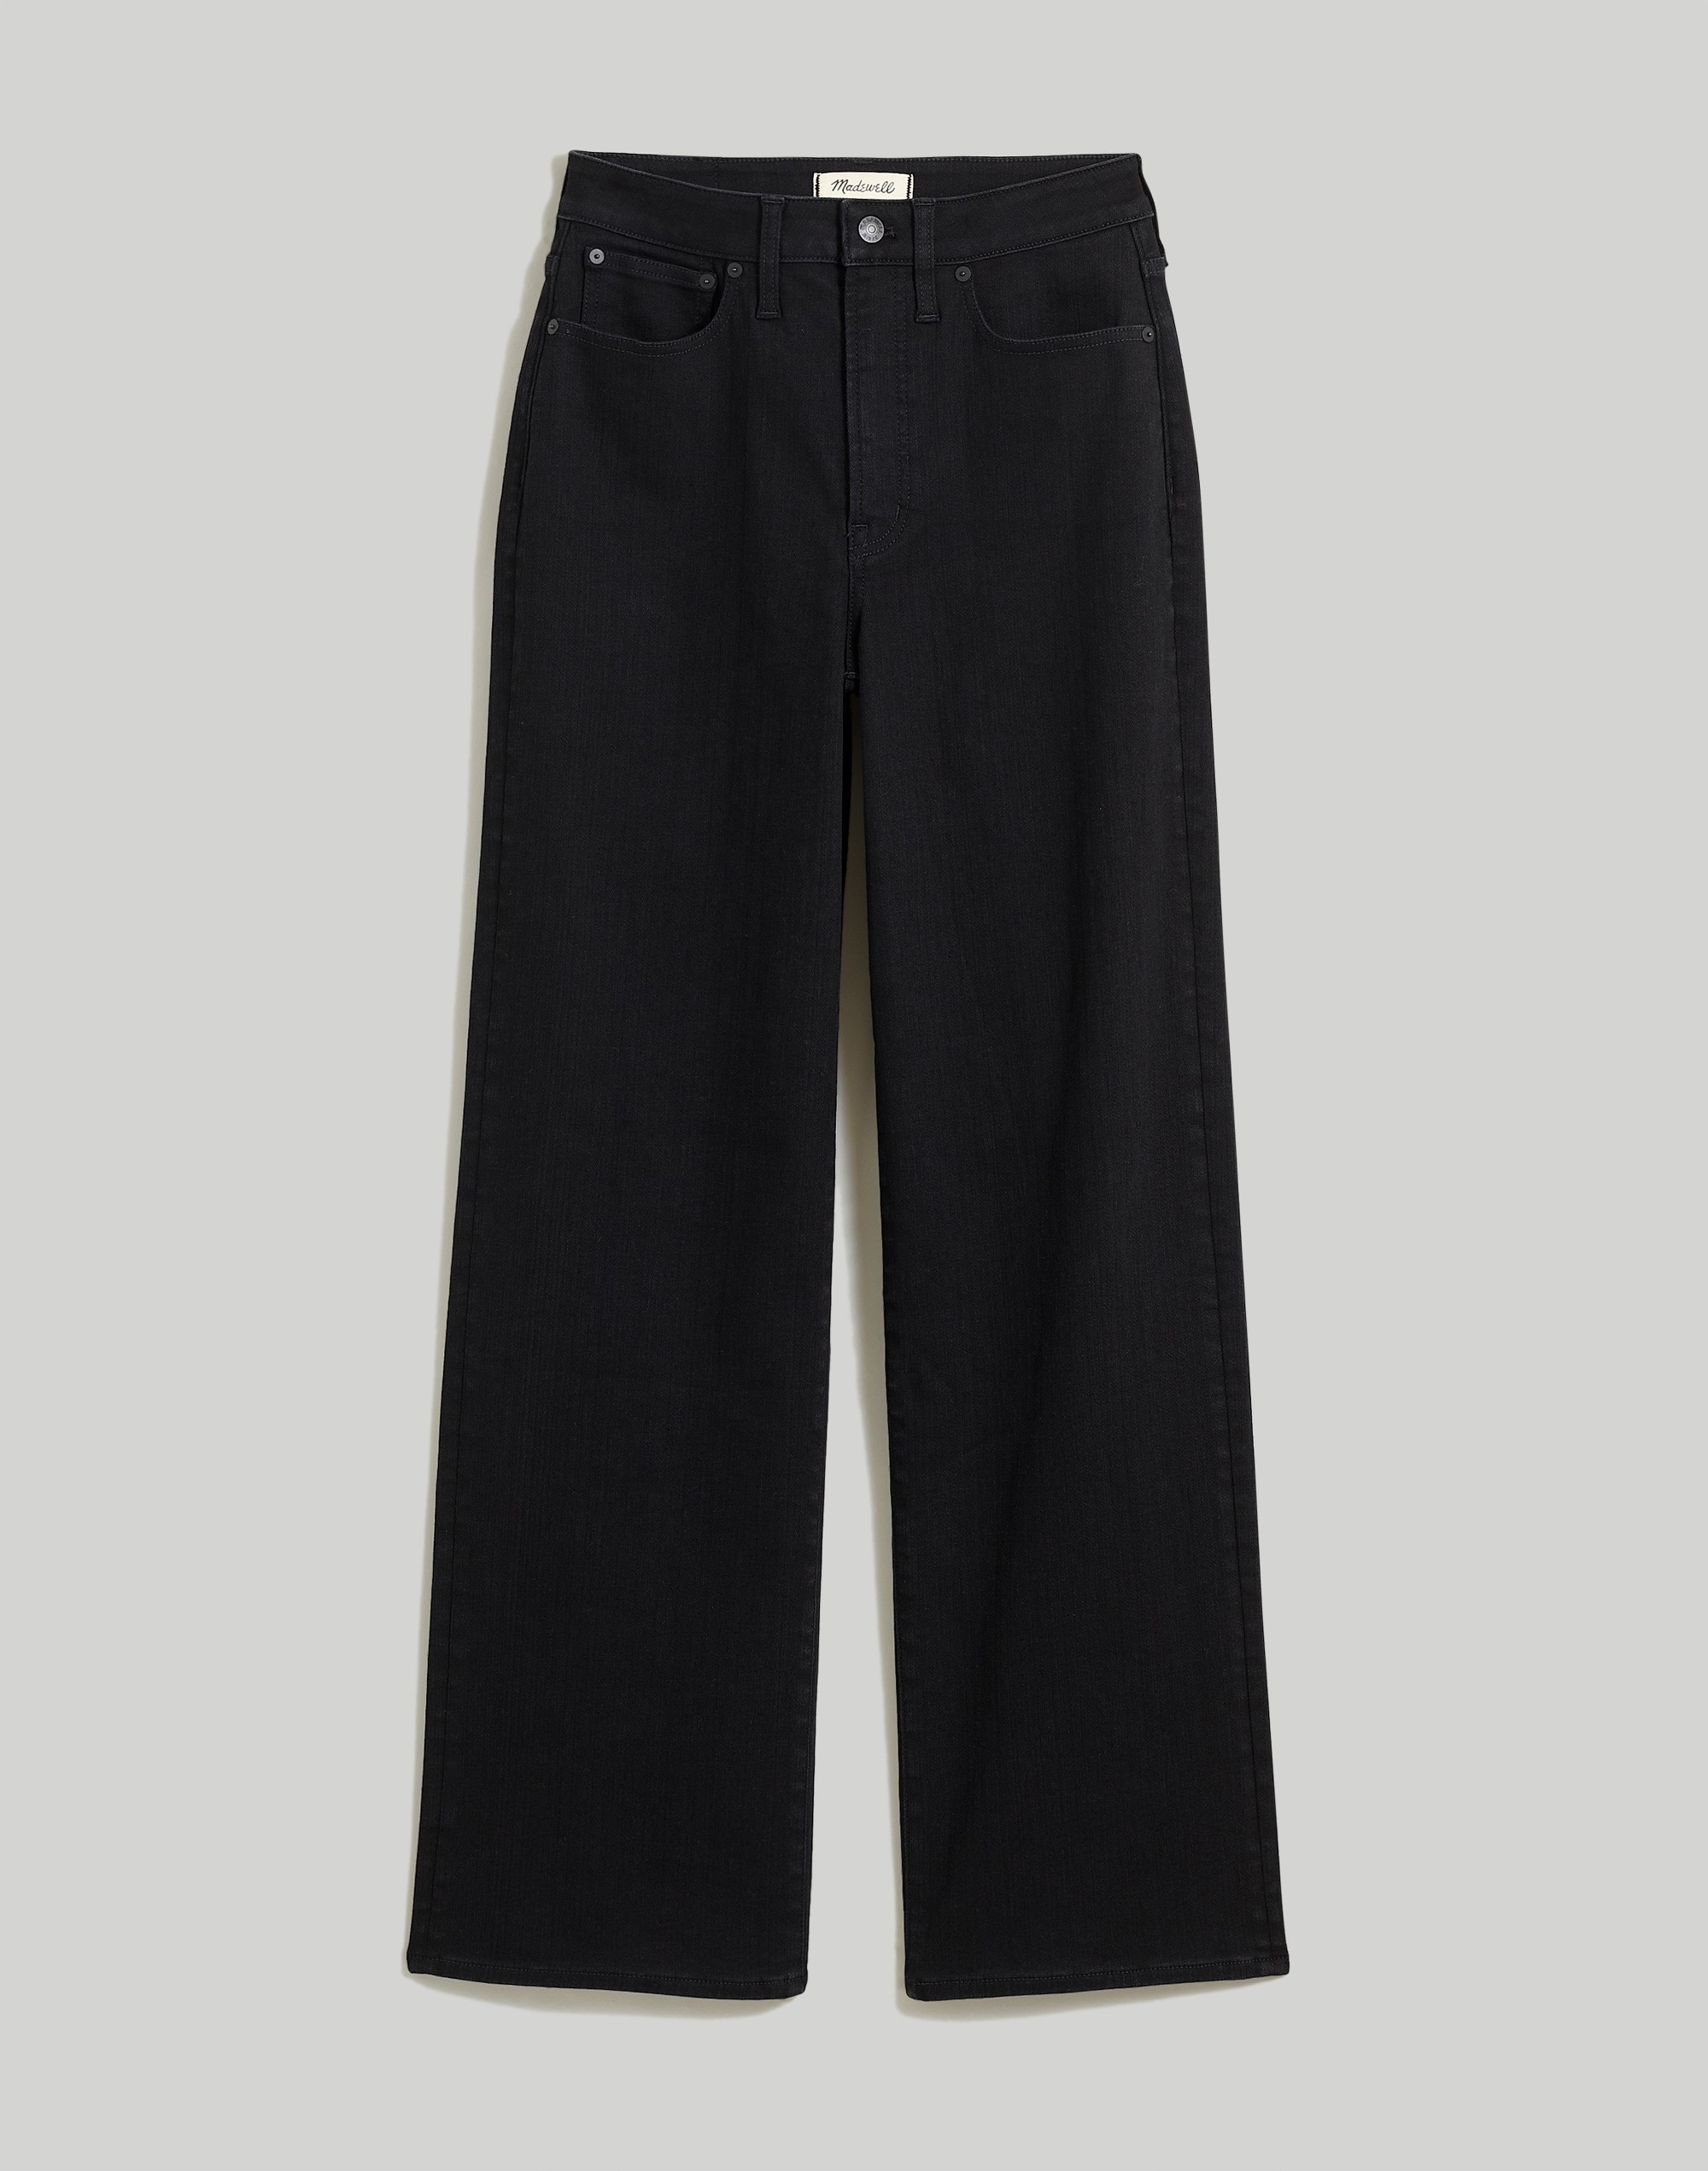 The Perfect Vintage Wide-Leg Jean in Black Rinse Wash